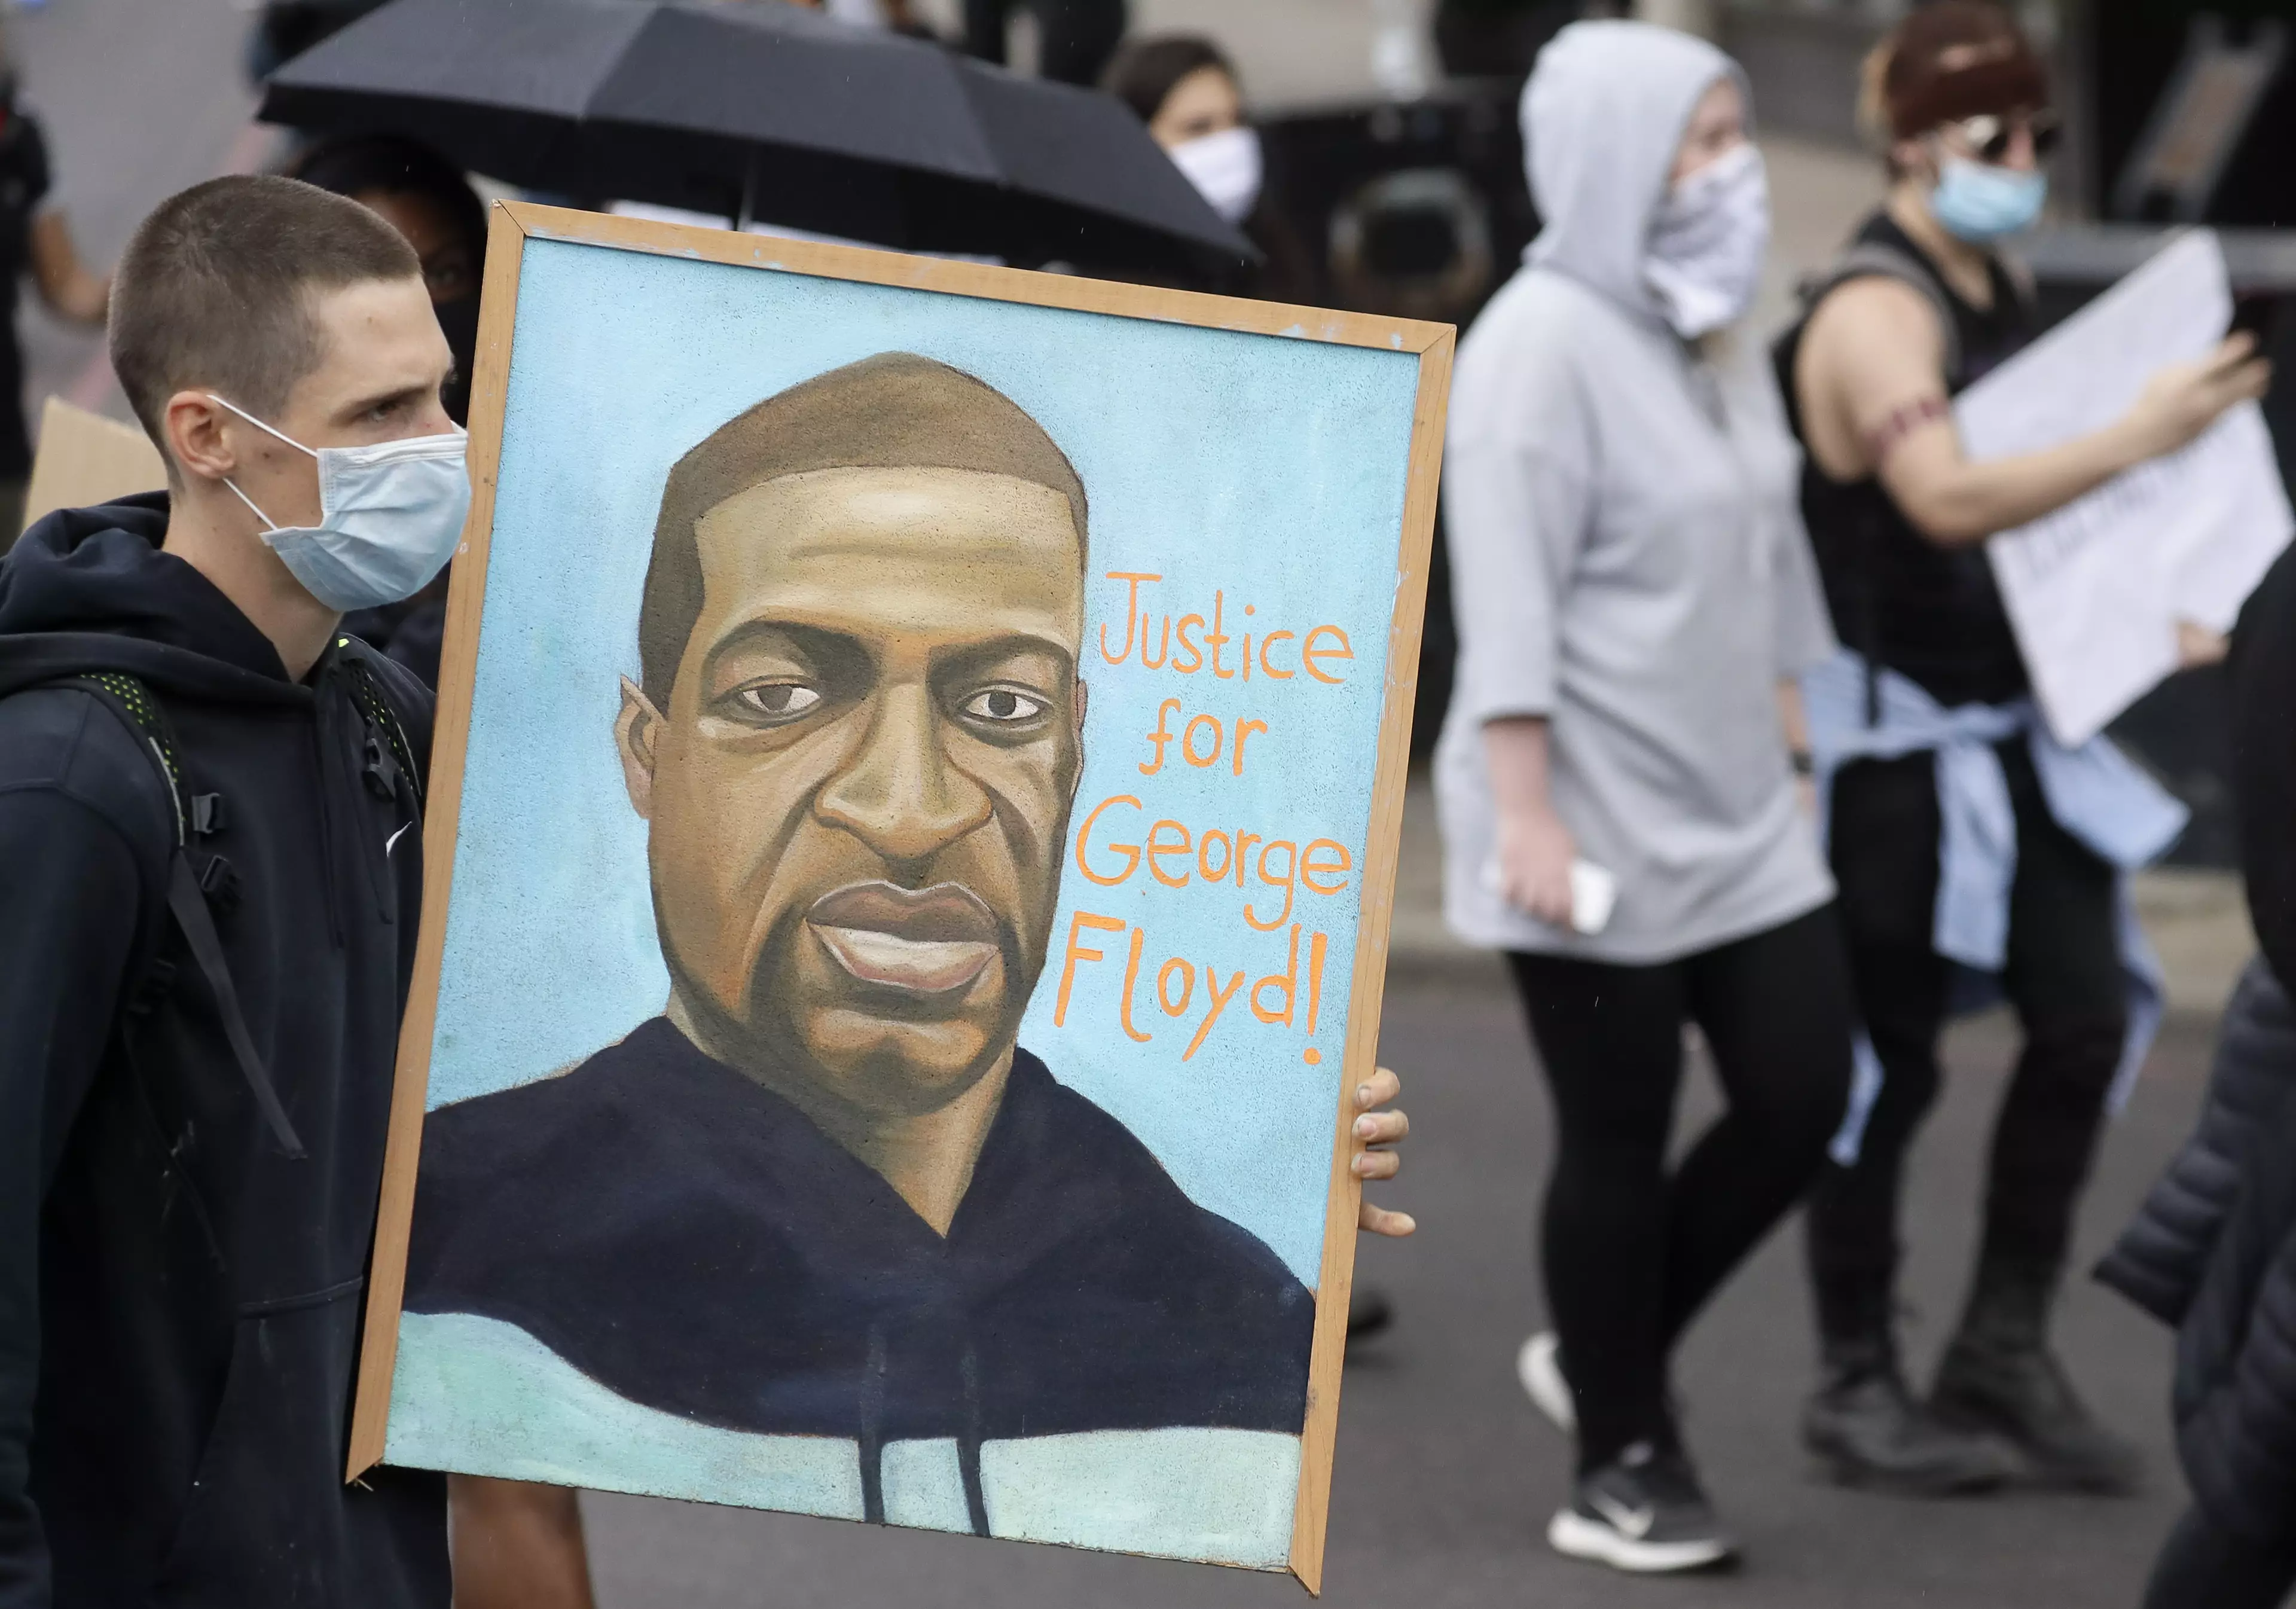 Floyd's death has sparked worldwide protests.